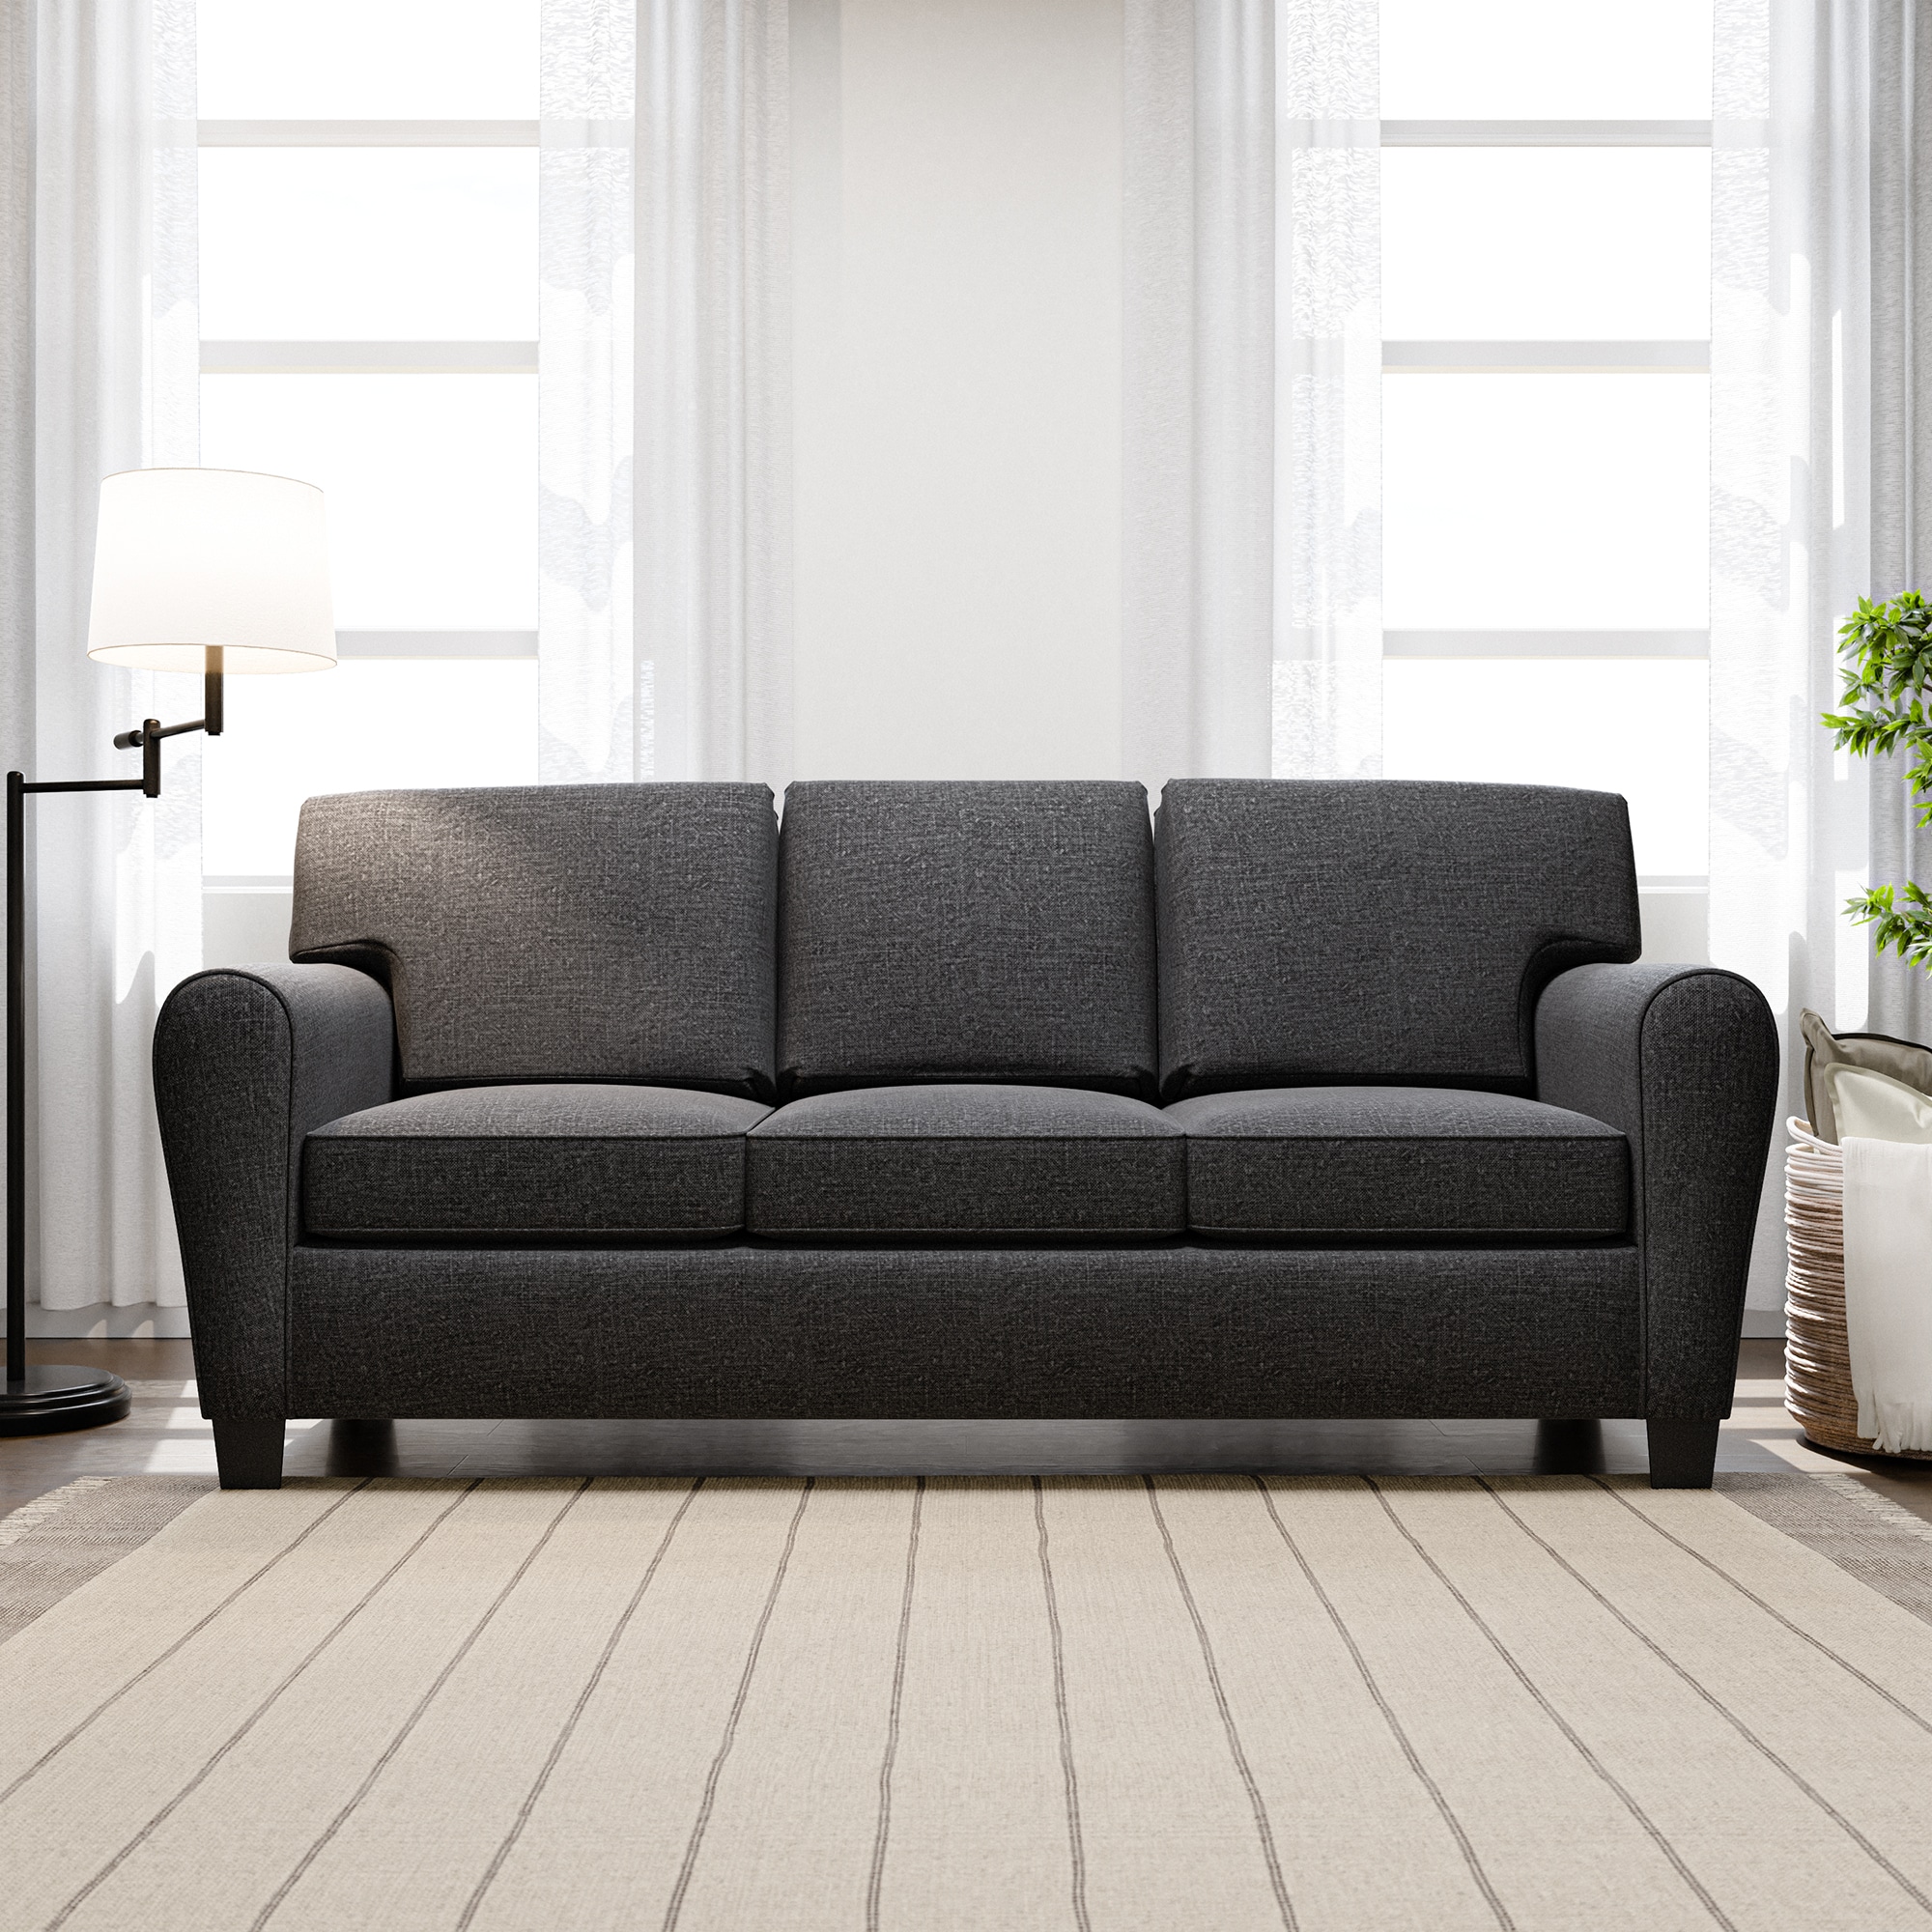 Brookside Abby Casual Charcoal Polyester/Blend Sofa in Gray | BS0004SOF00CH